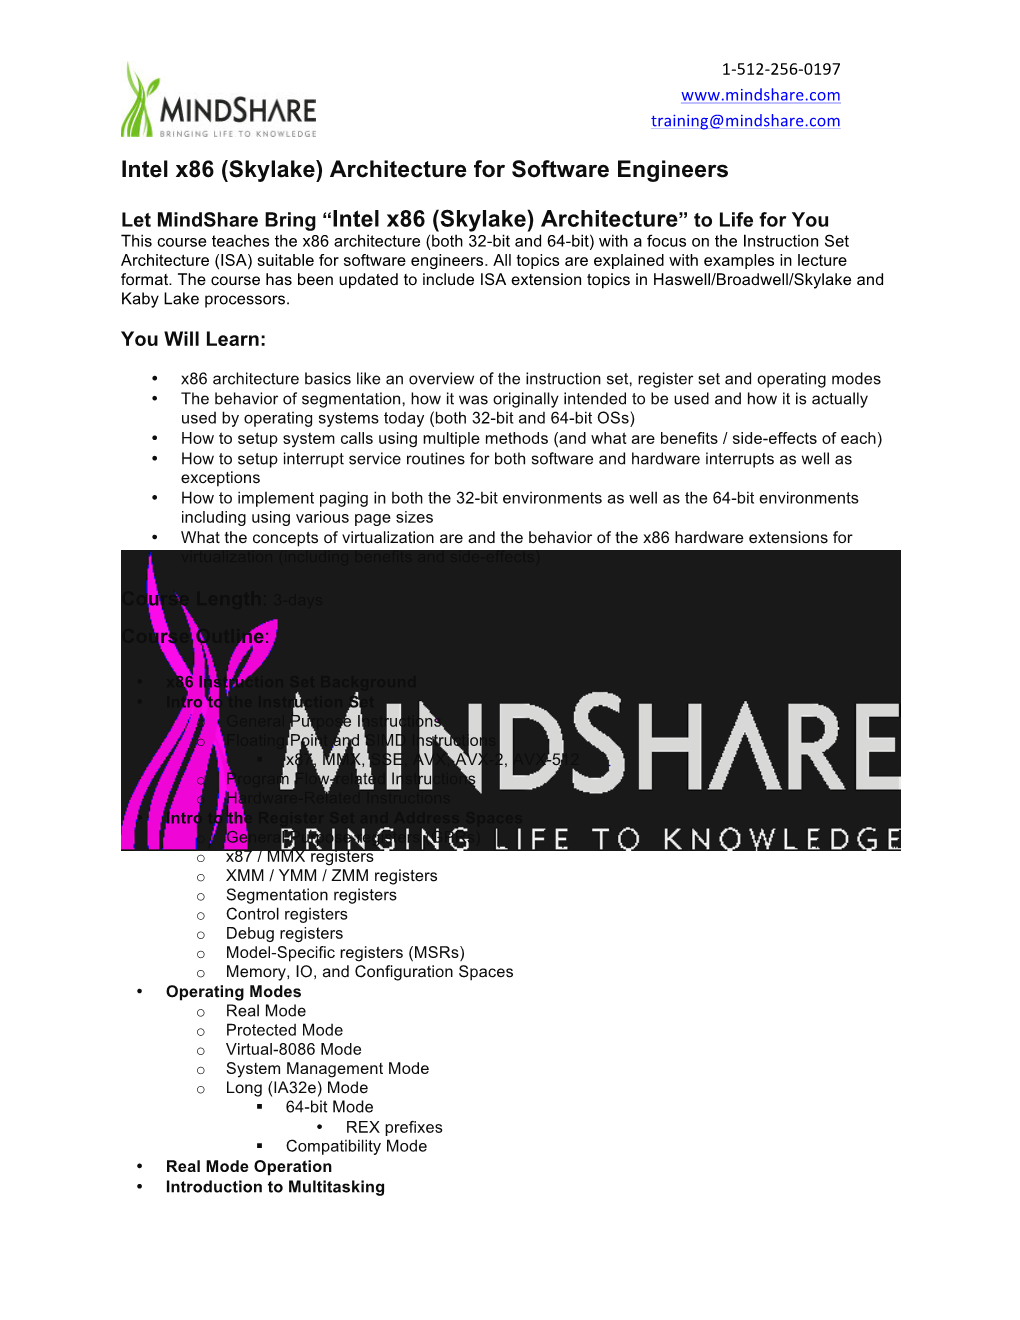 Intel X86 (Skylake) Architecture for Software Engineers Let Mindshare